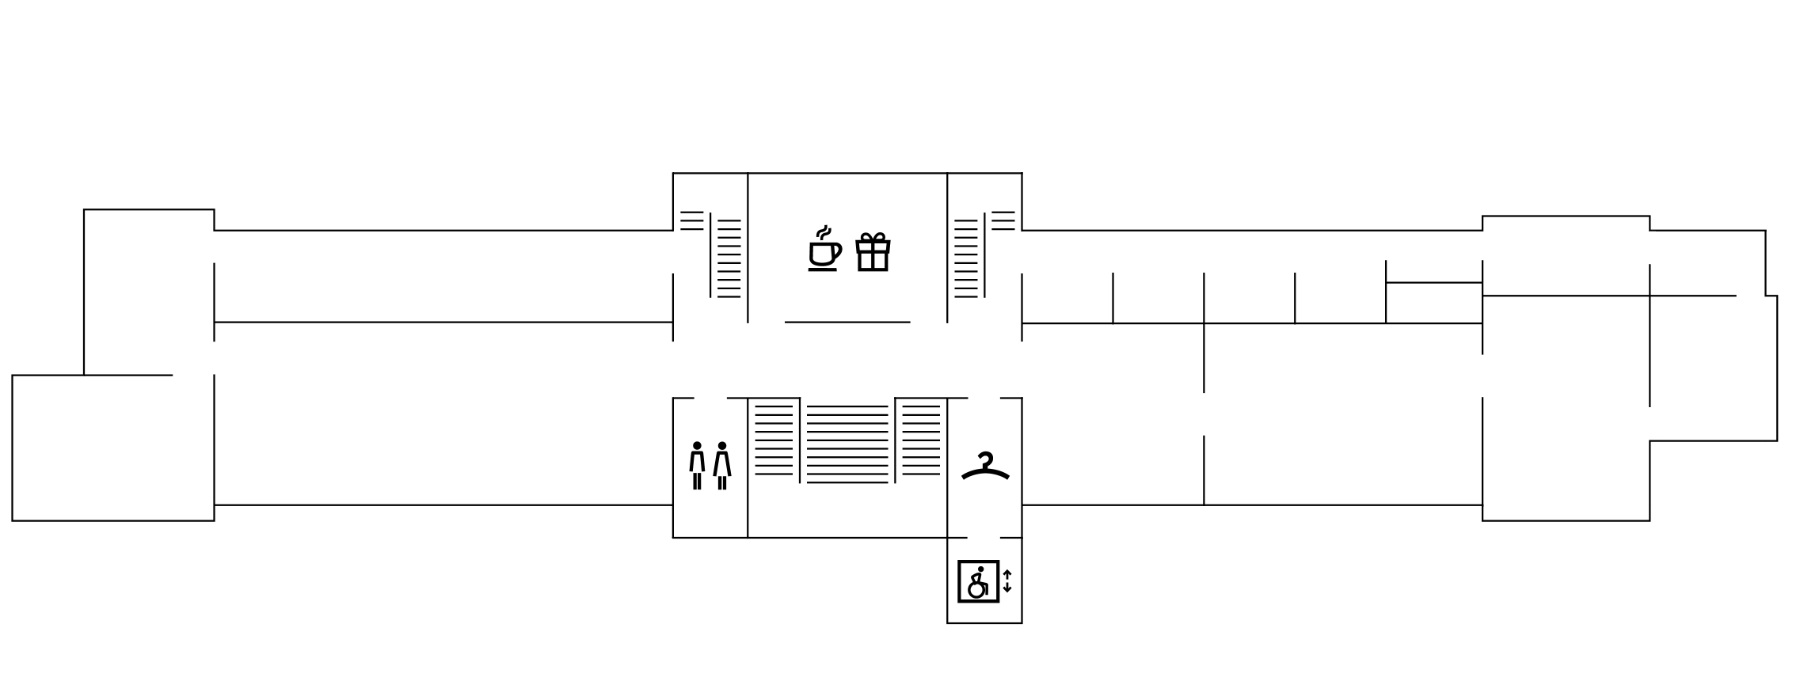 ground plan of the 2nd floor